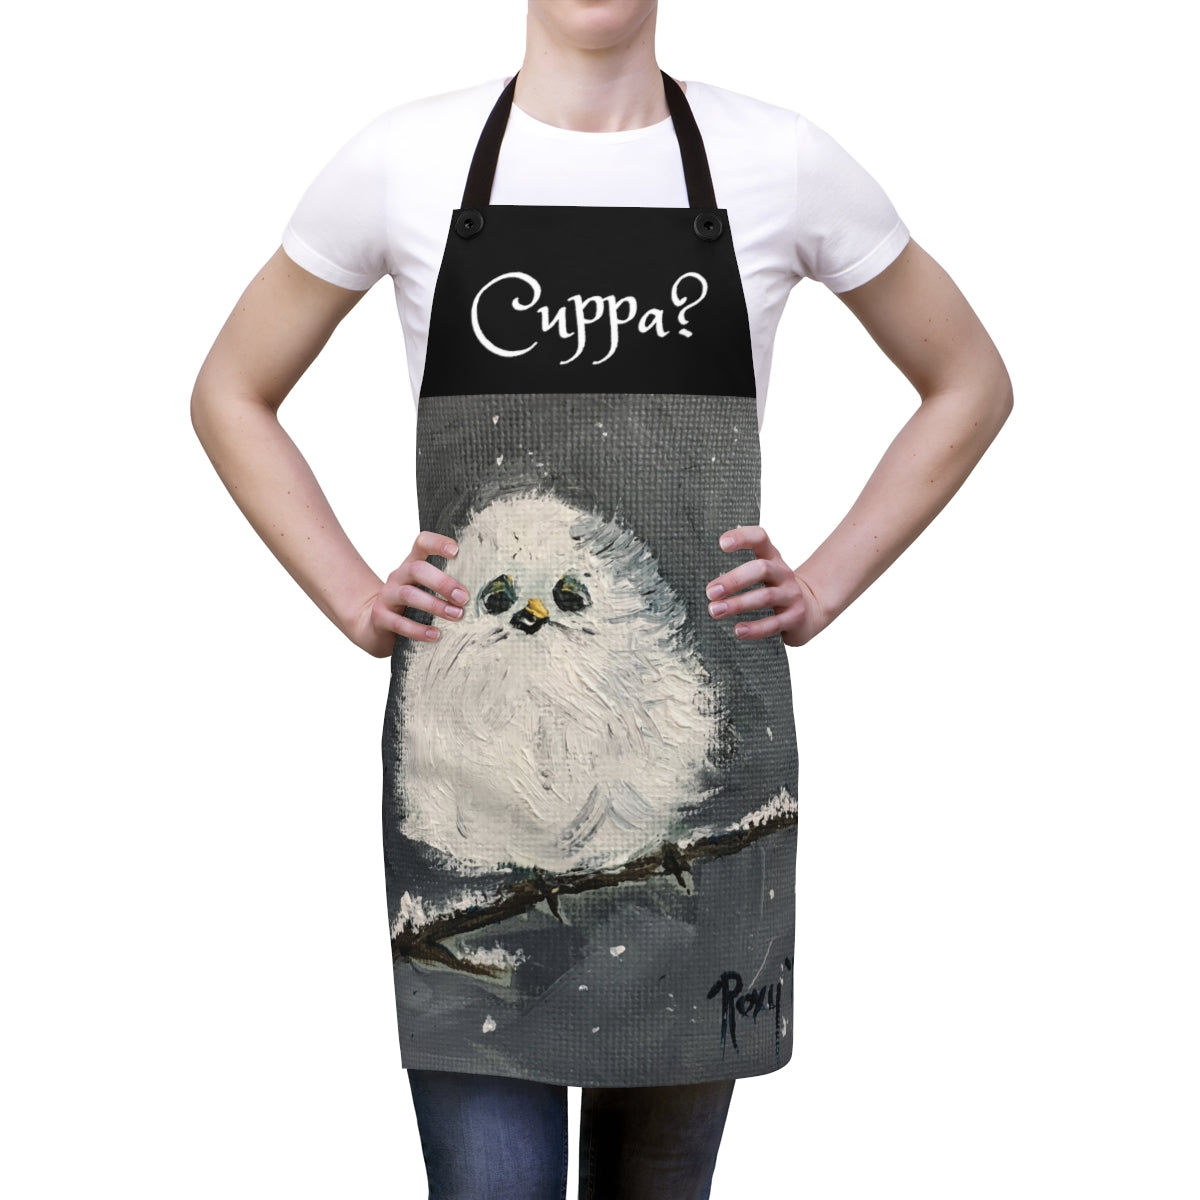 Cuppa? English UK phrase saying on a Black Kitchen Apron  with   Baby Tit  Bird in the Snow